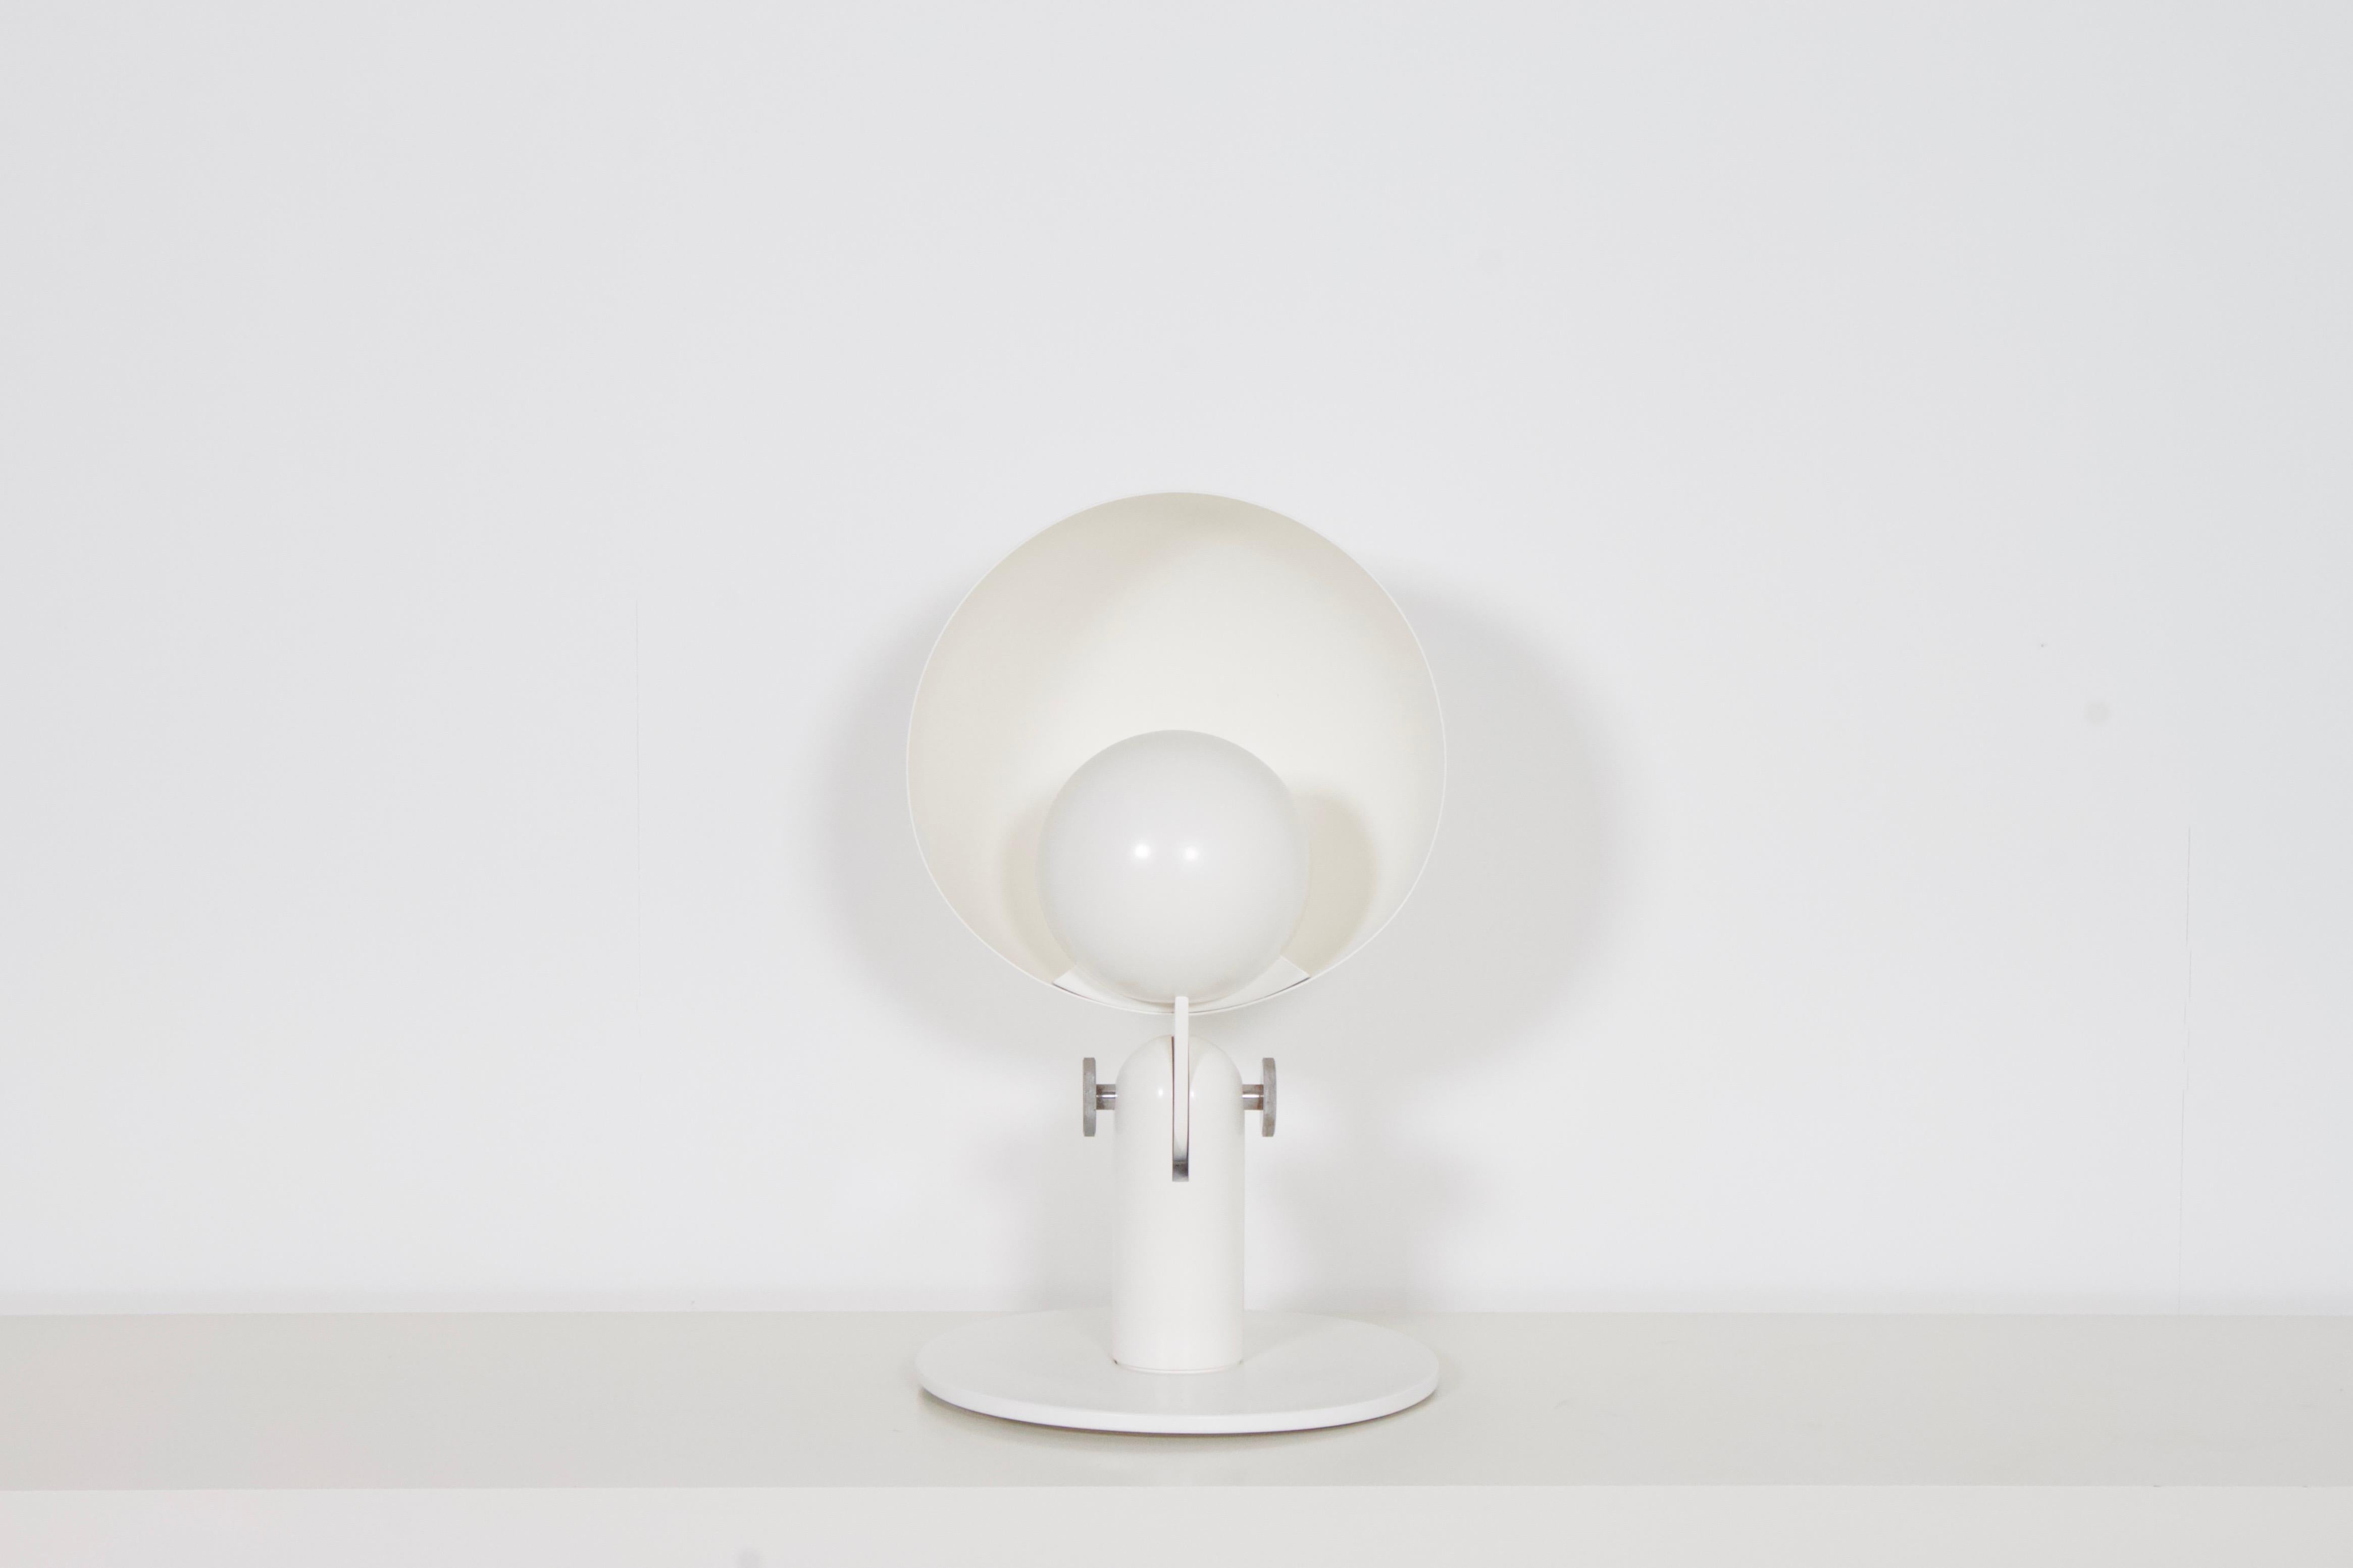 Impressive Italian Bieffeplast ‘Cuffia’ table lamp in very good condition.

Designed by Francesco Buzzi in 1969

The lamp consists of a aluminum 40 cm diameter hemispherical reflector combined with a 20 cm diameter shade that houses a